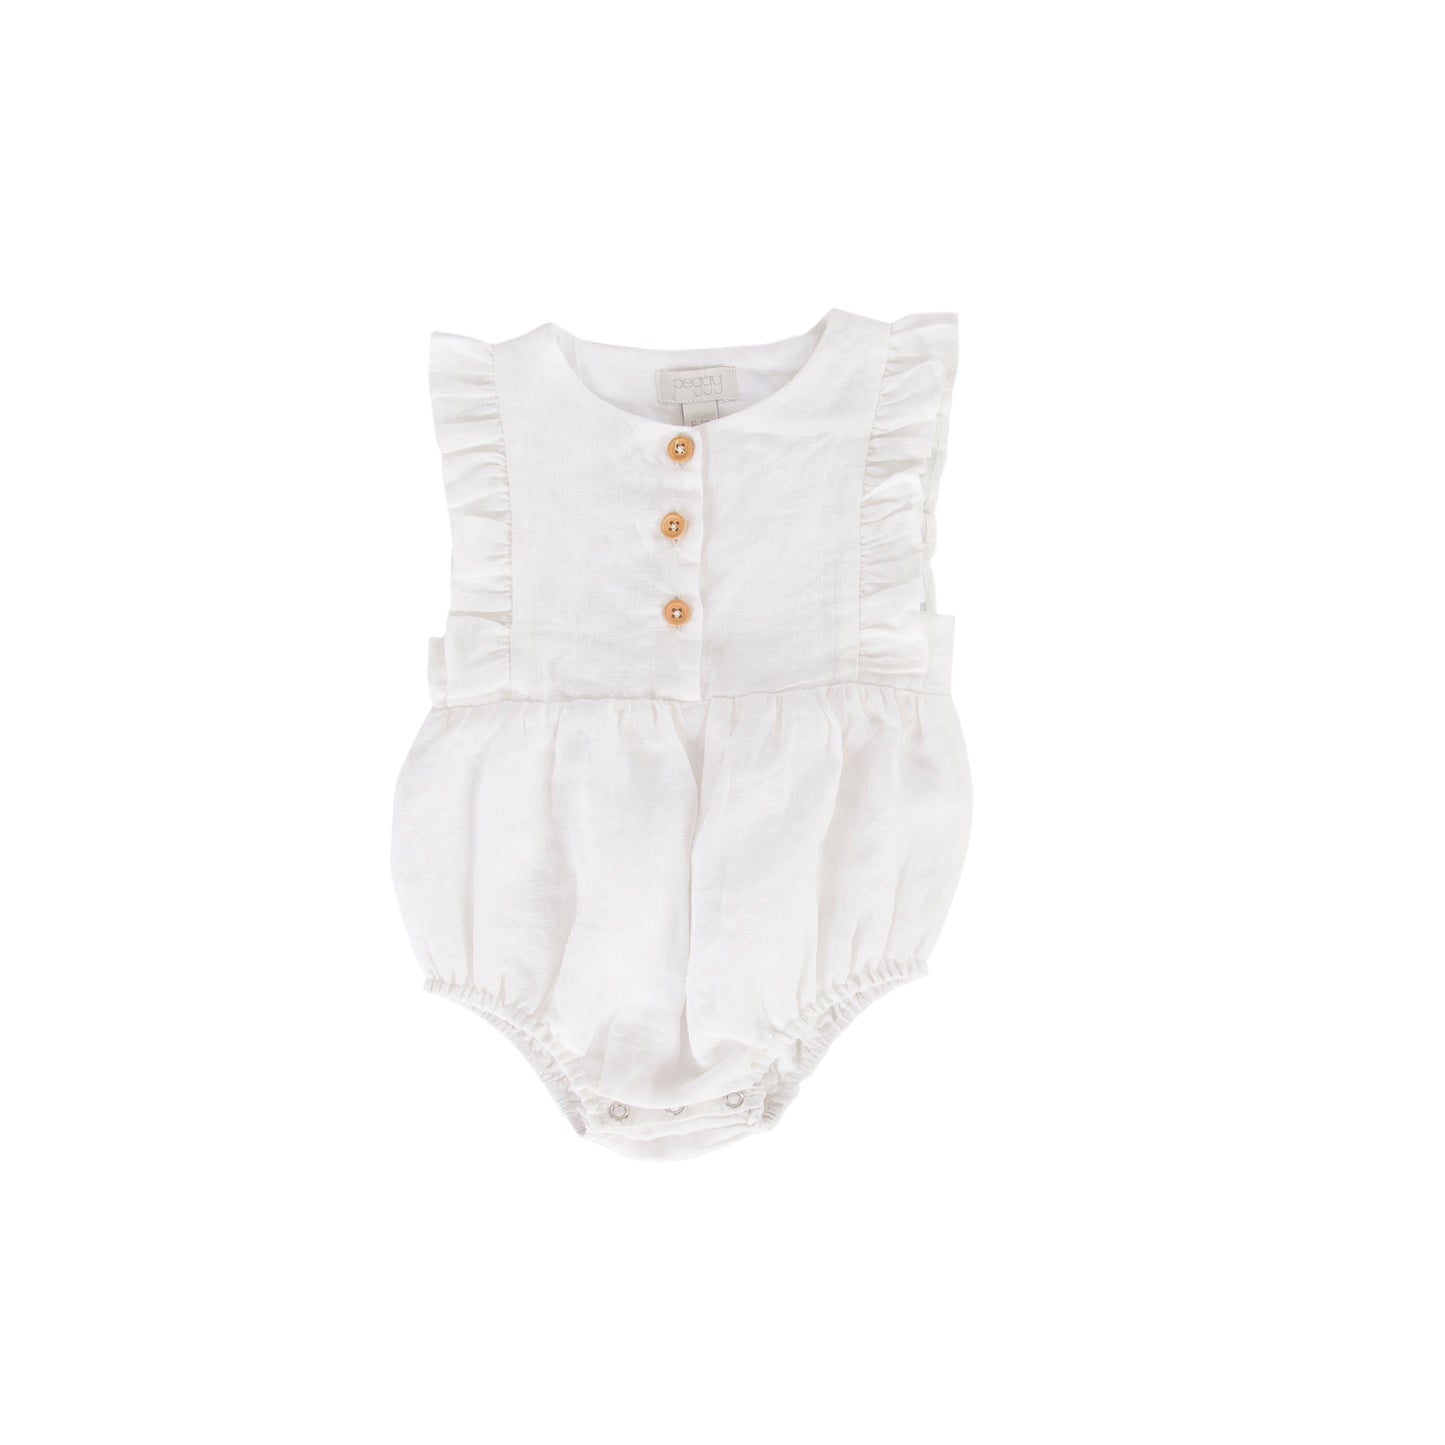 August Playsuit White Cotton/linen - Essential collection